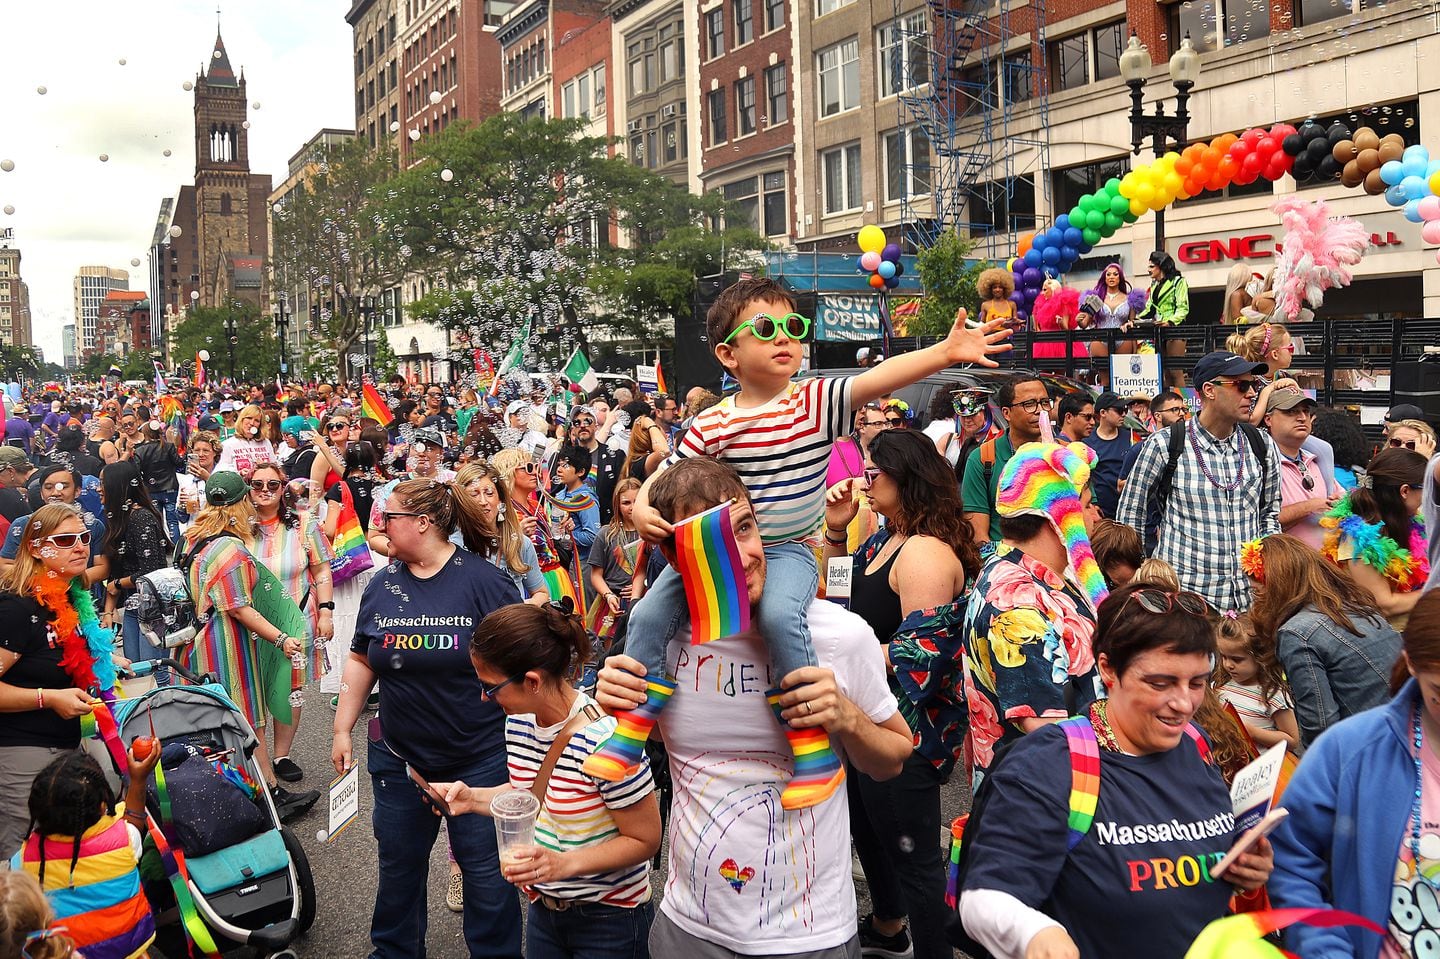 Thousands took part in the 2023 Pride parade which started in Copley Square.